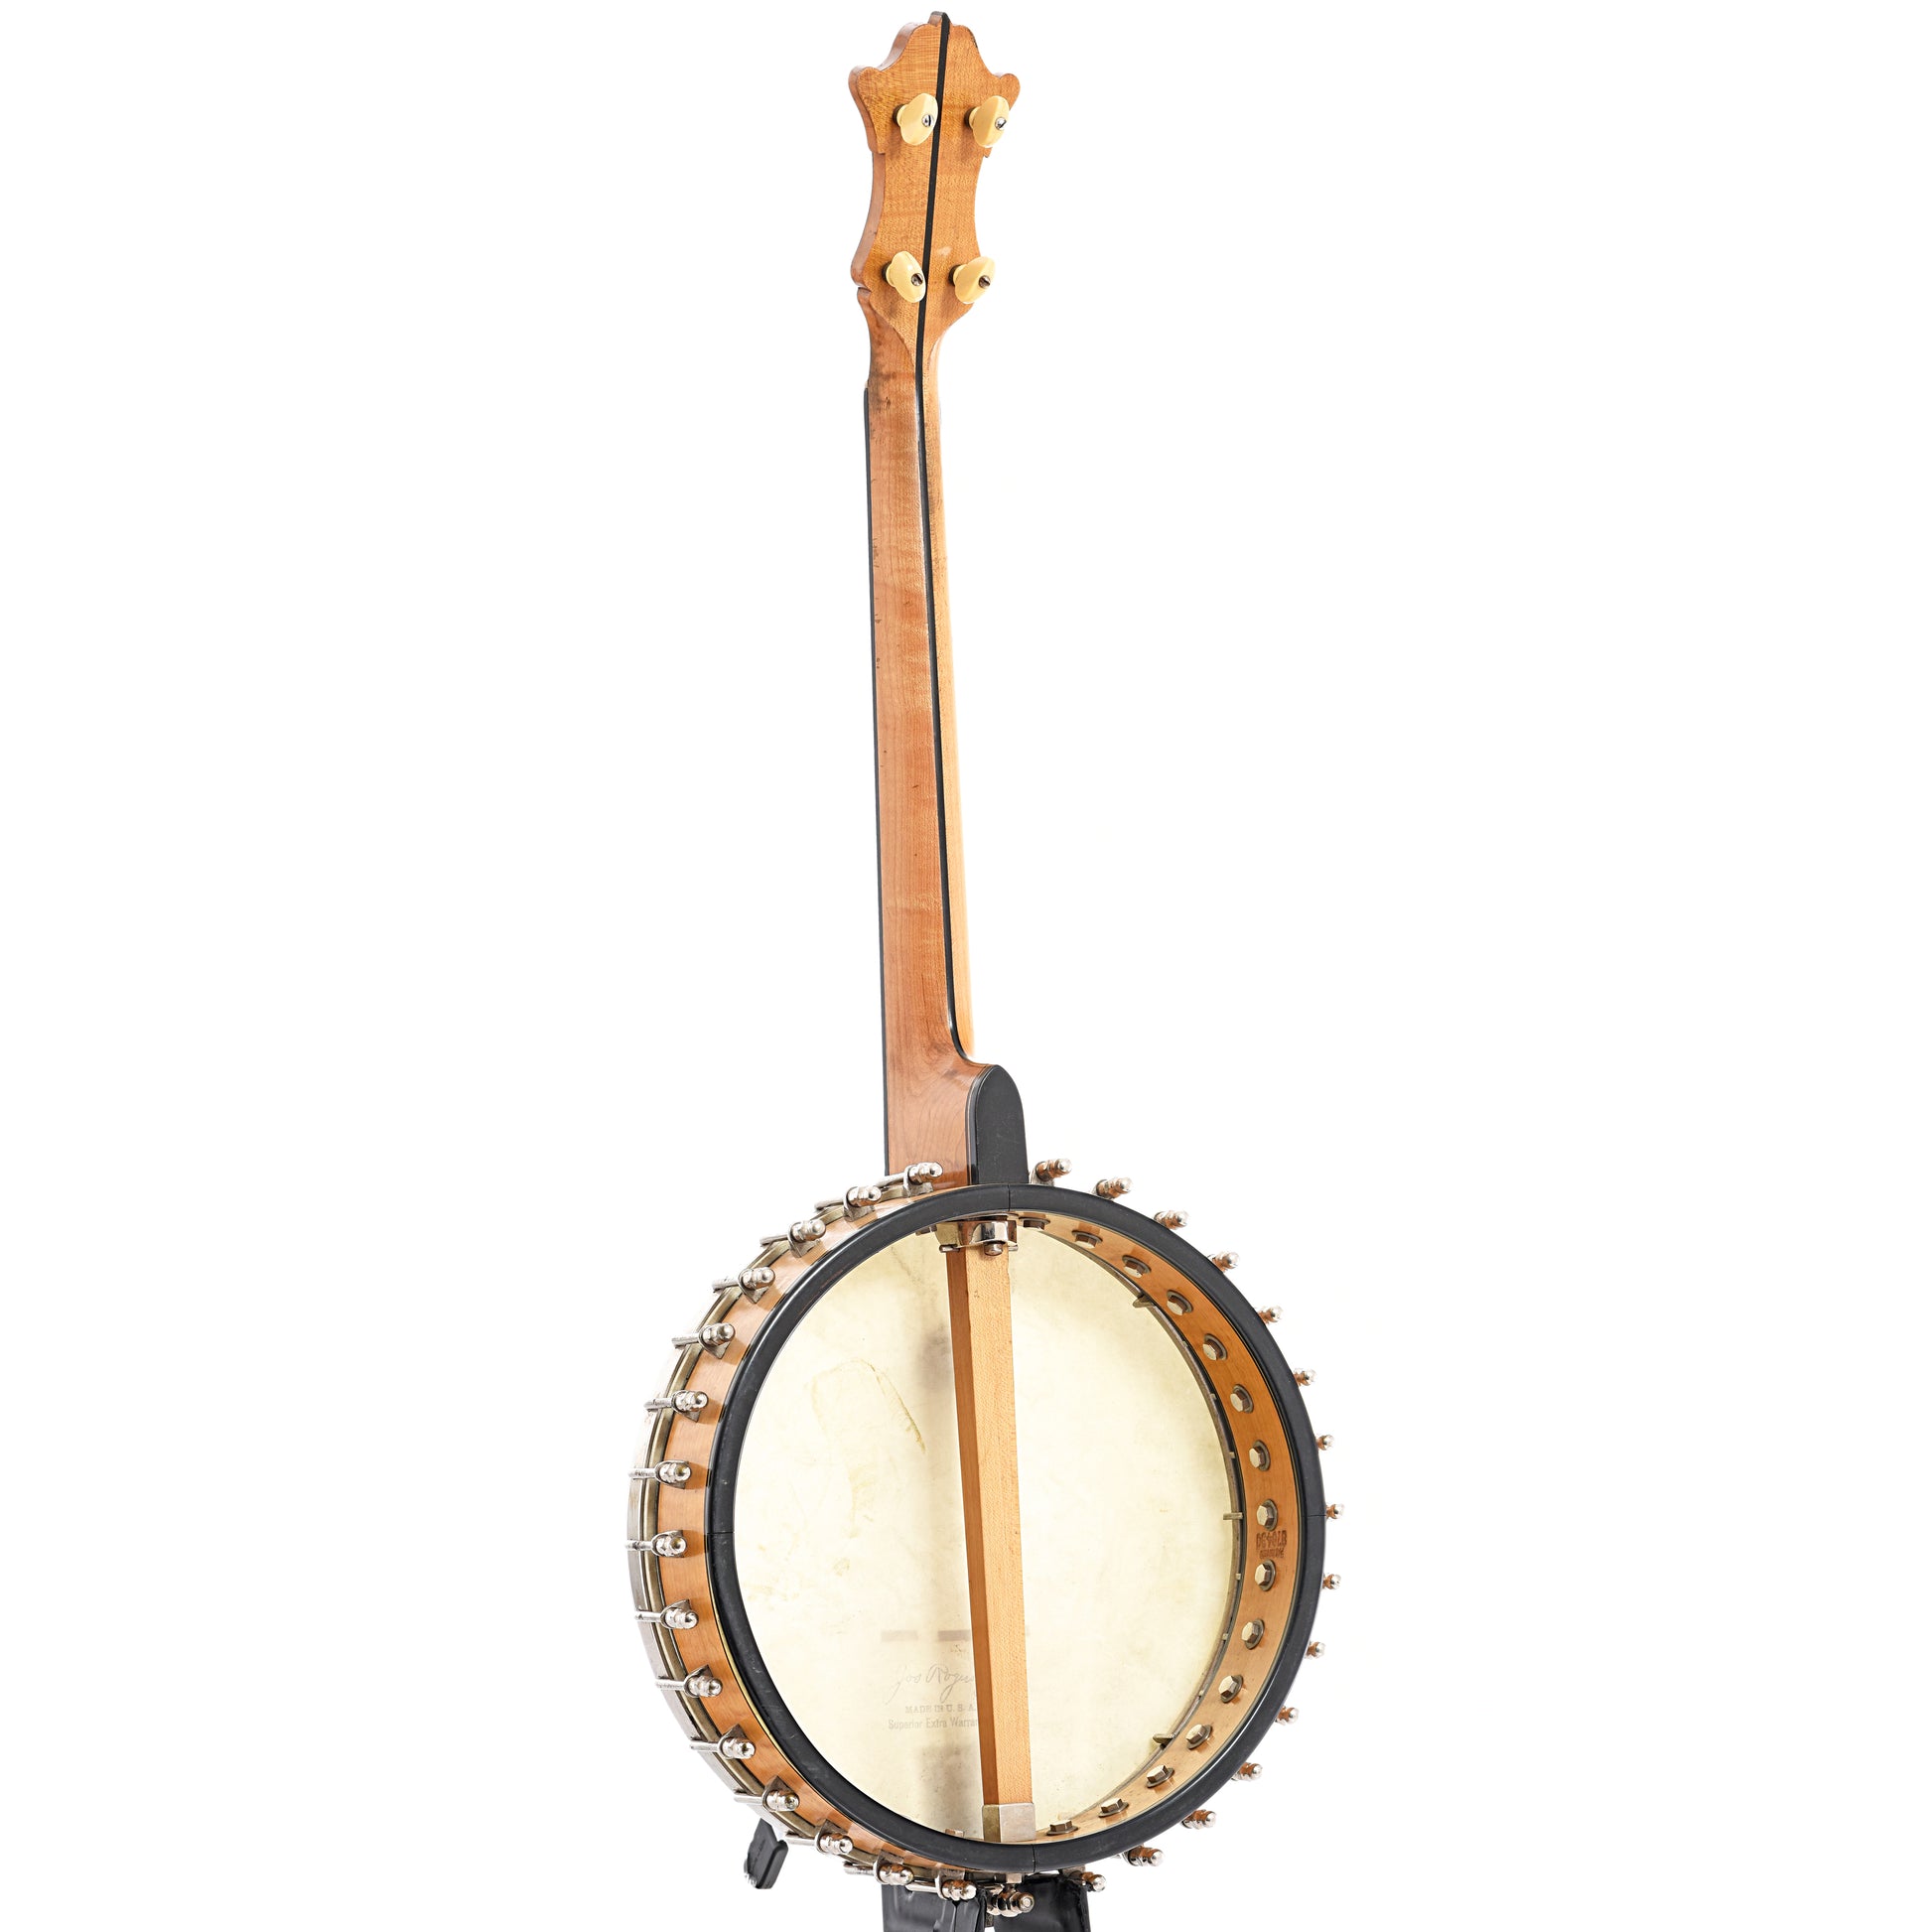 Full back and side of Lyon & Healy (UNMARKED) No.475 Tenor Banjo